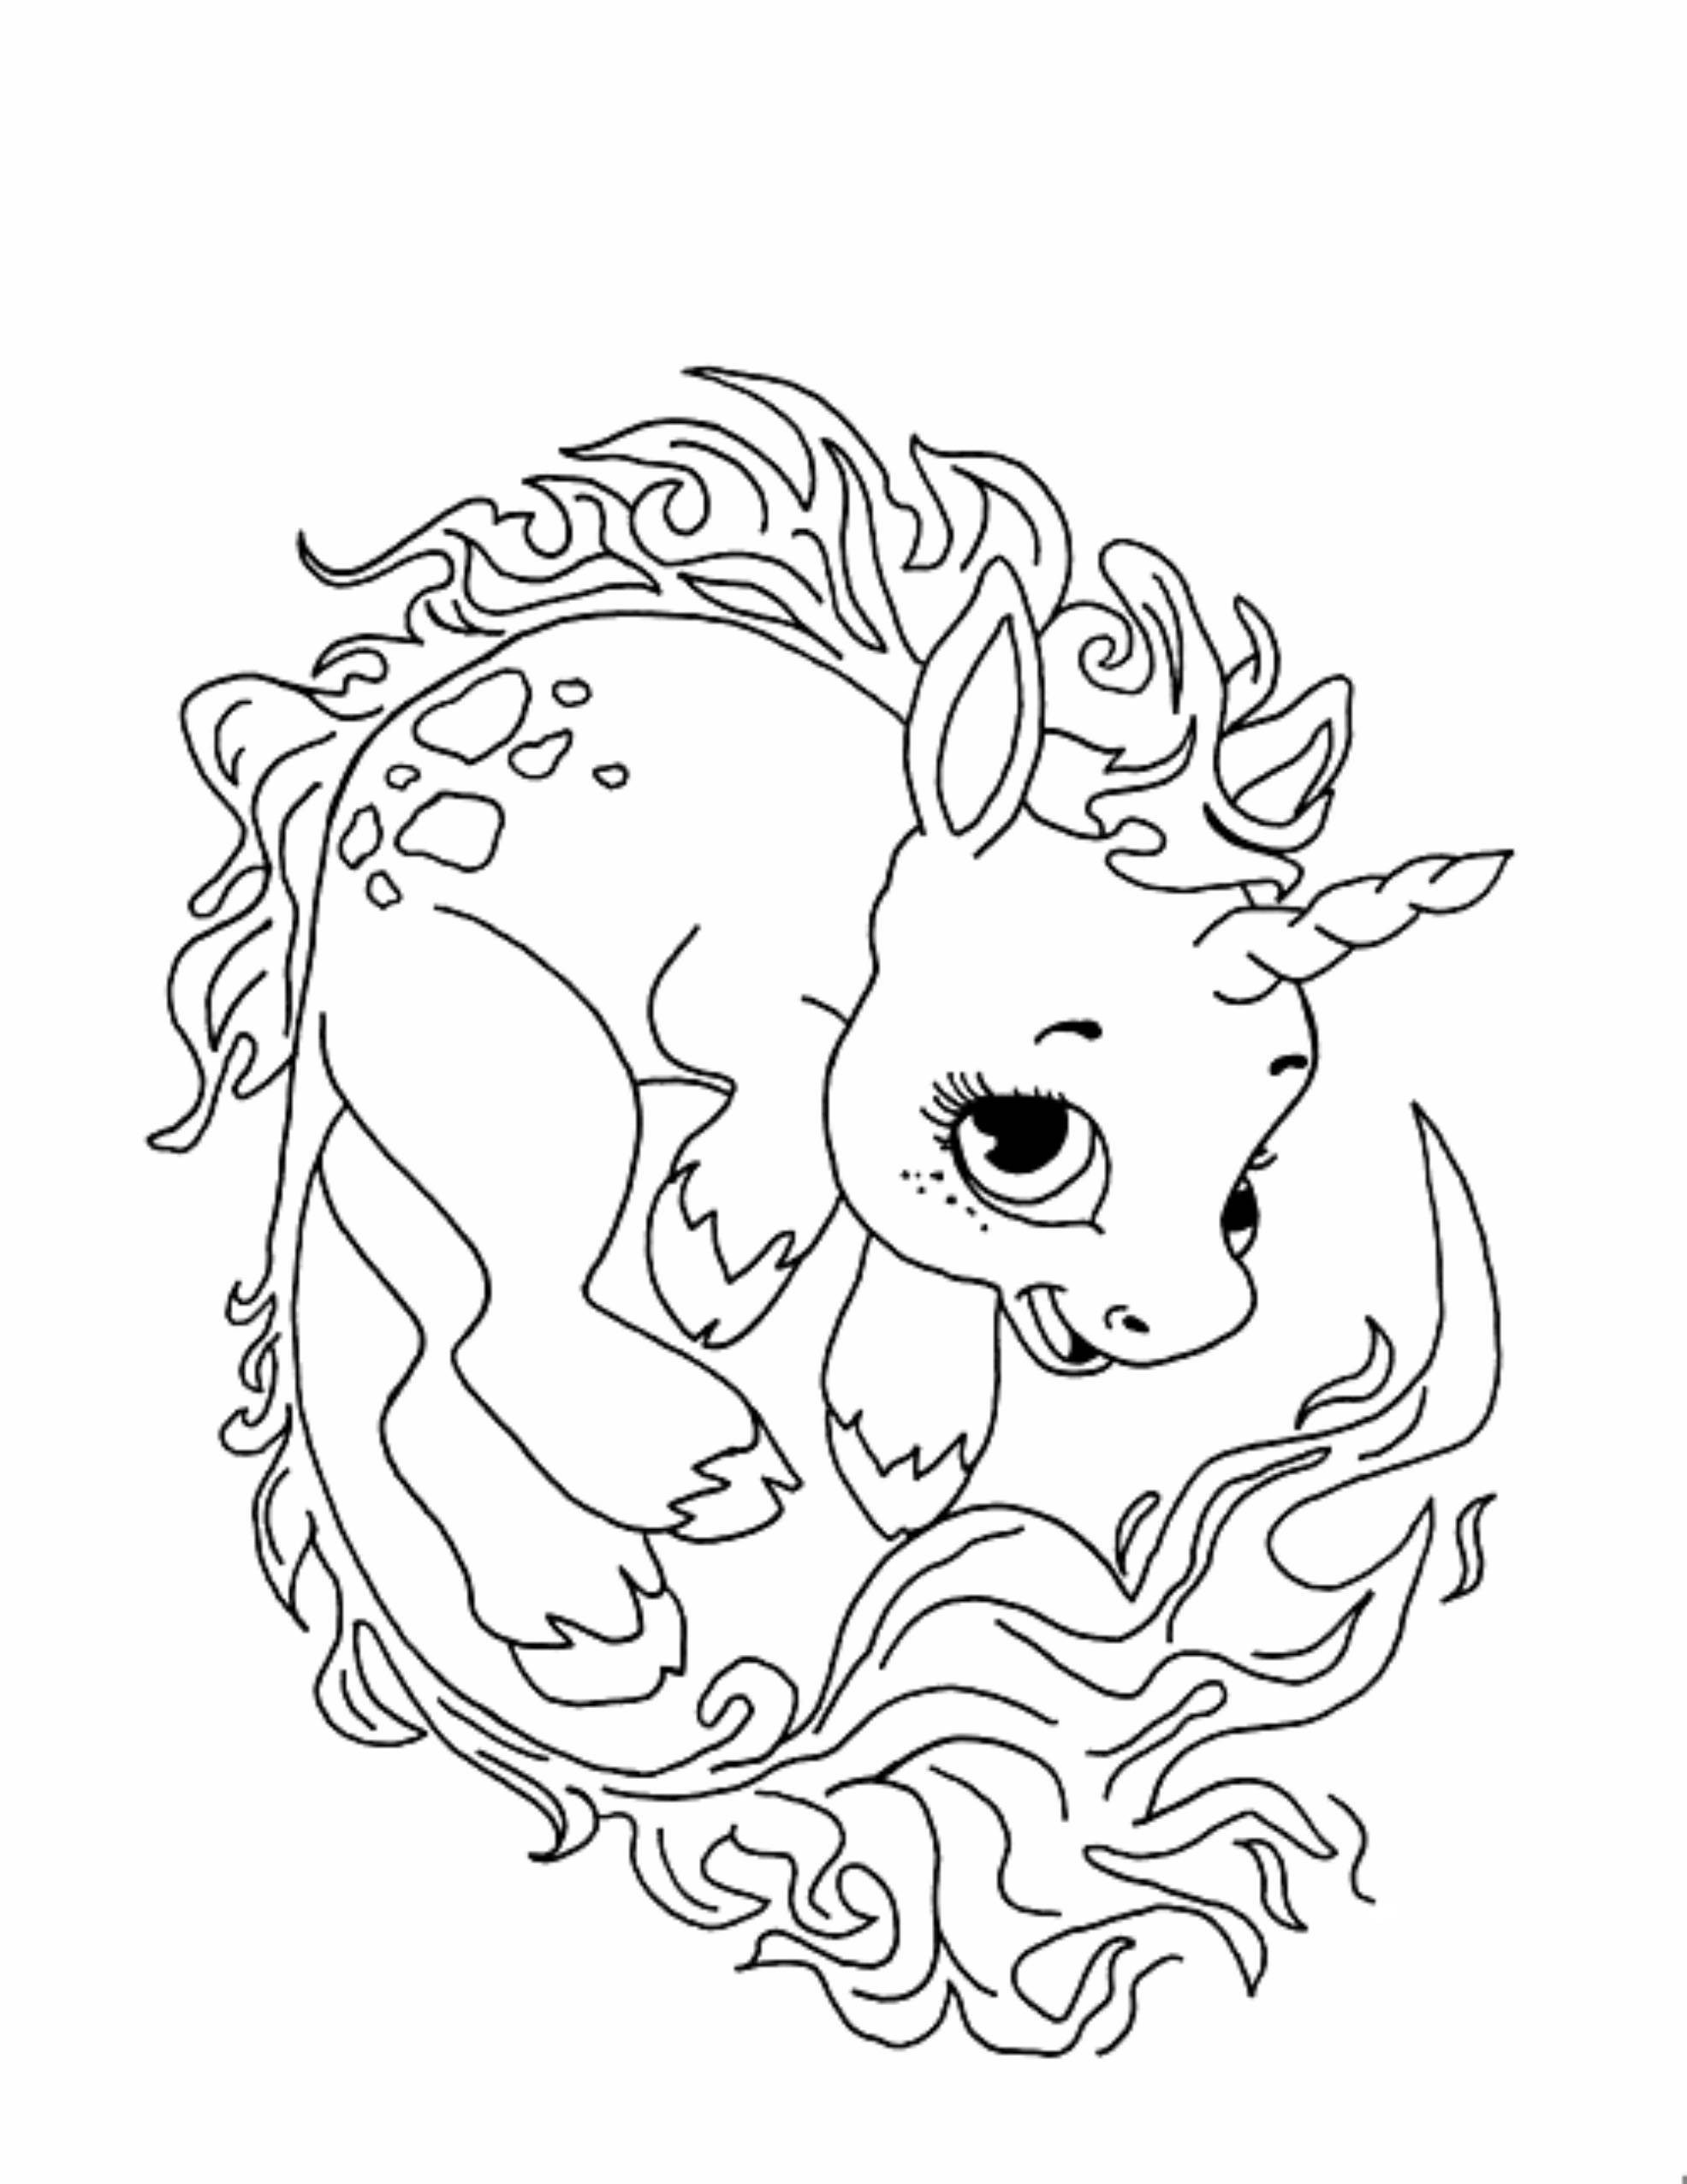 Cute Coloring Pages for Adults Valid Cute Coloring Pages to Print Fresh Unicorn Drawing for Kids